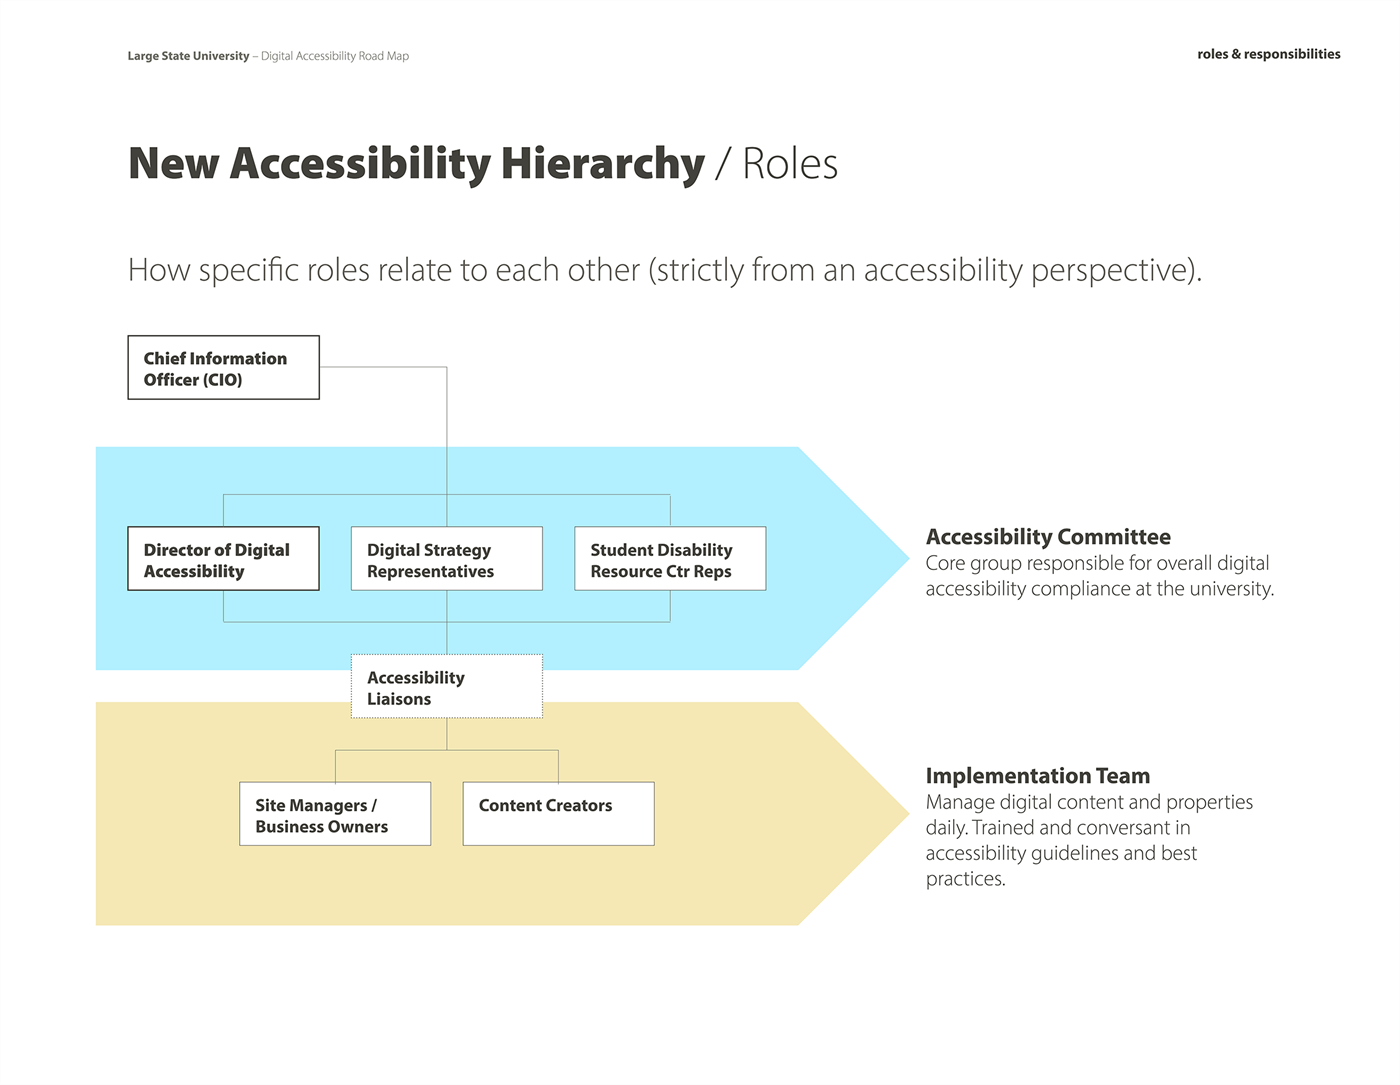 New Accessibility Hierarchy page from the Digital Accessibility Roadmap, showing how roles relate to each other. An accessibility committee and implementation team work with liaisons under the Chief Information Officer.